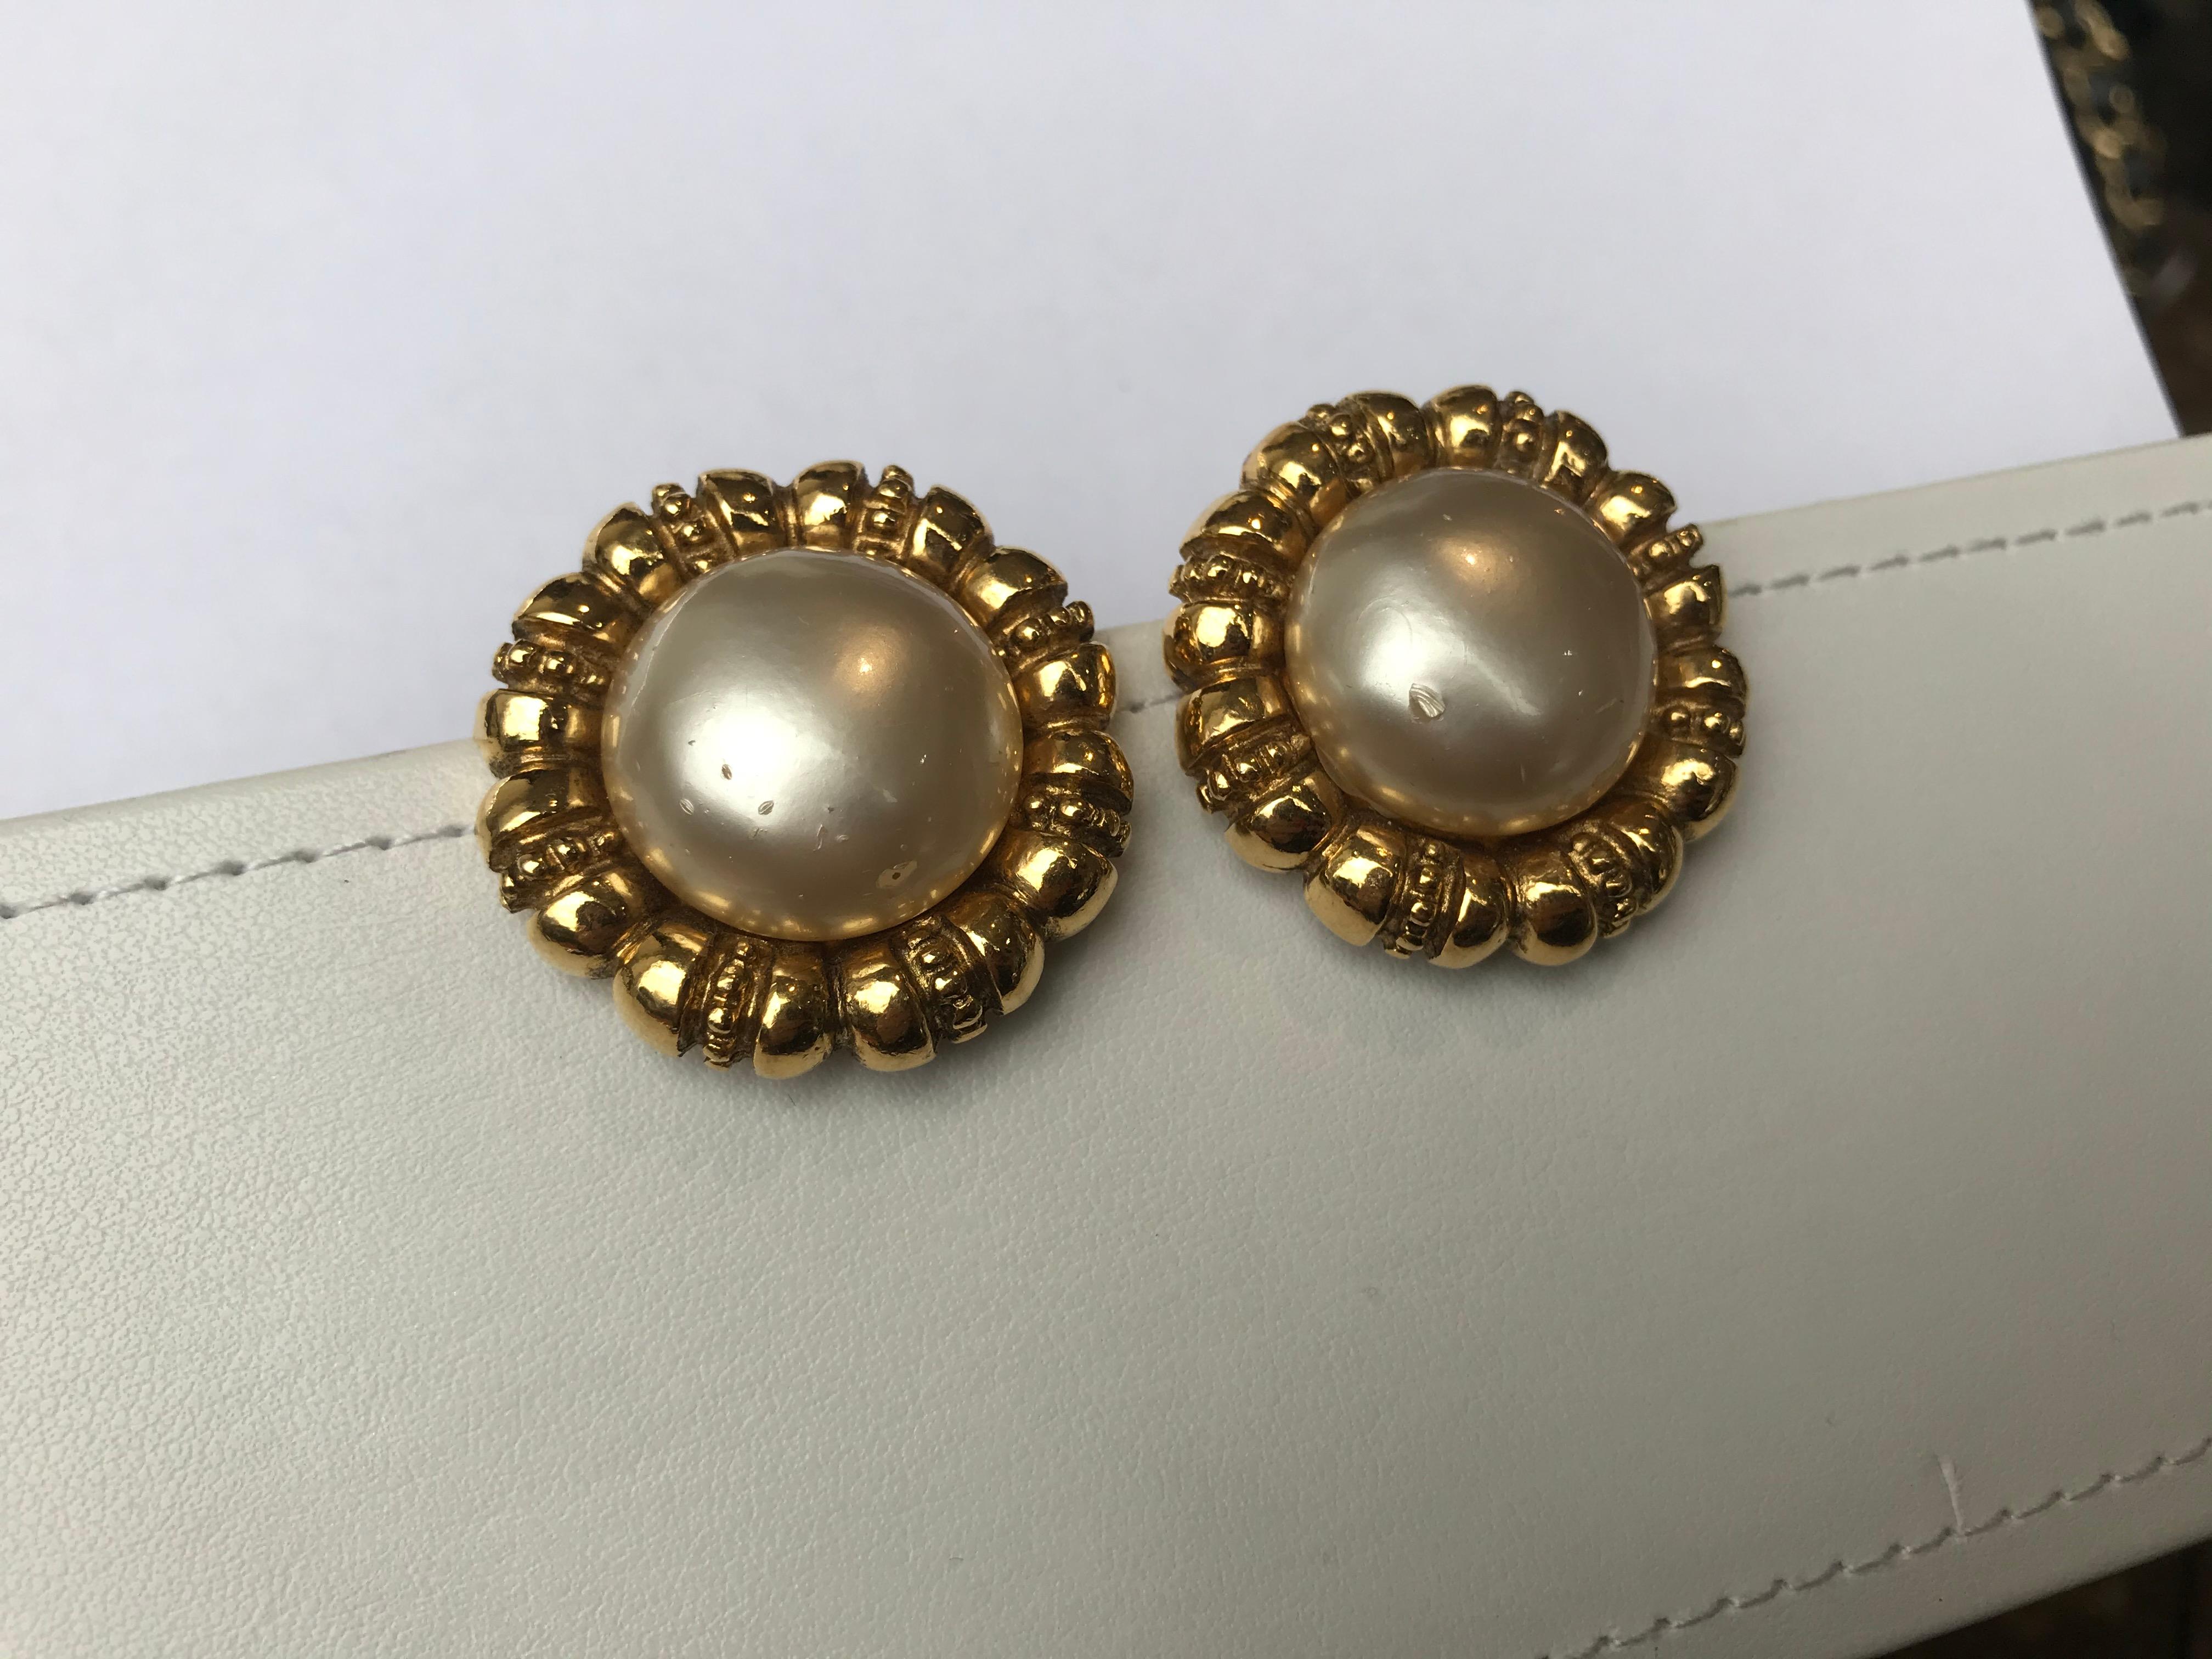 Gold-tone metal. Faux pearl at center. Clip-on closures.